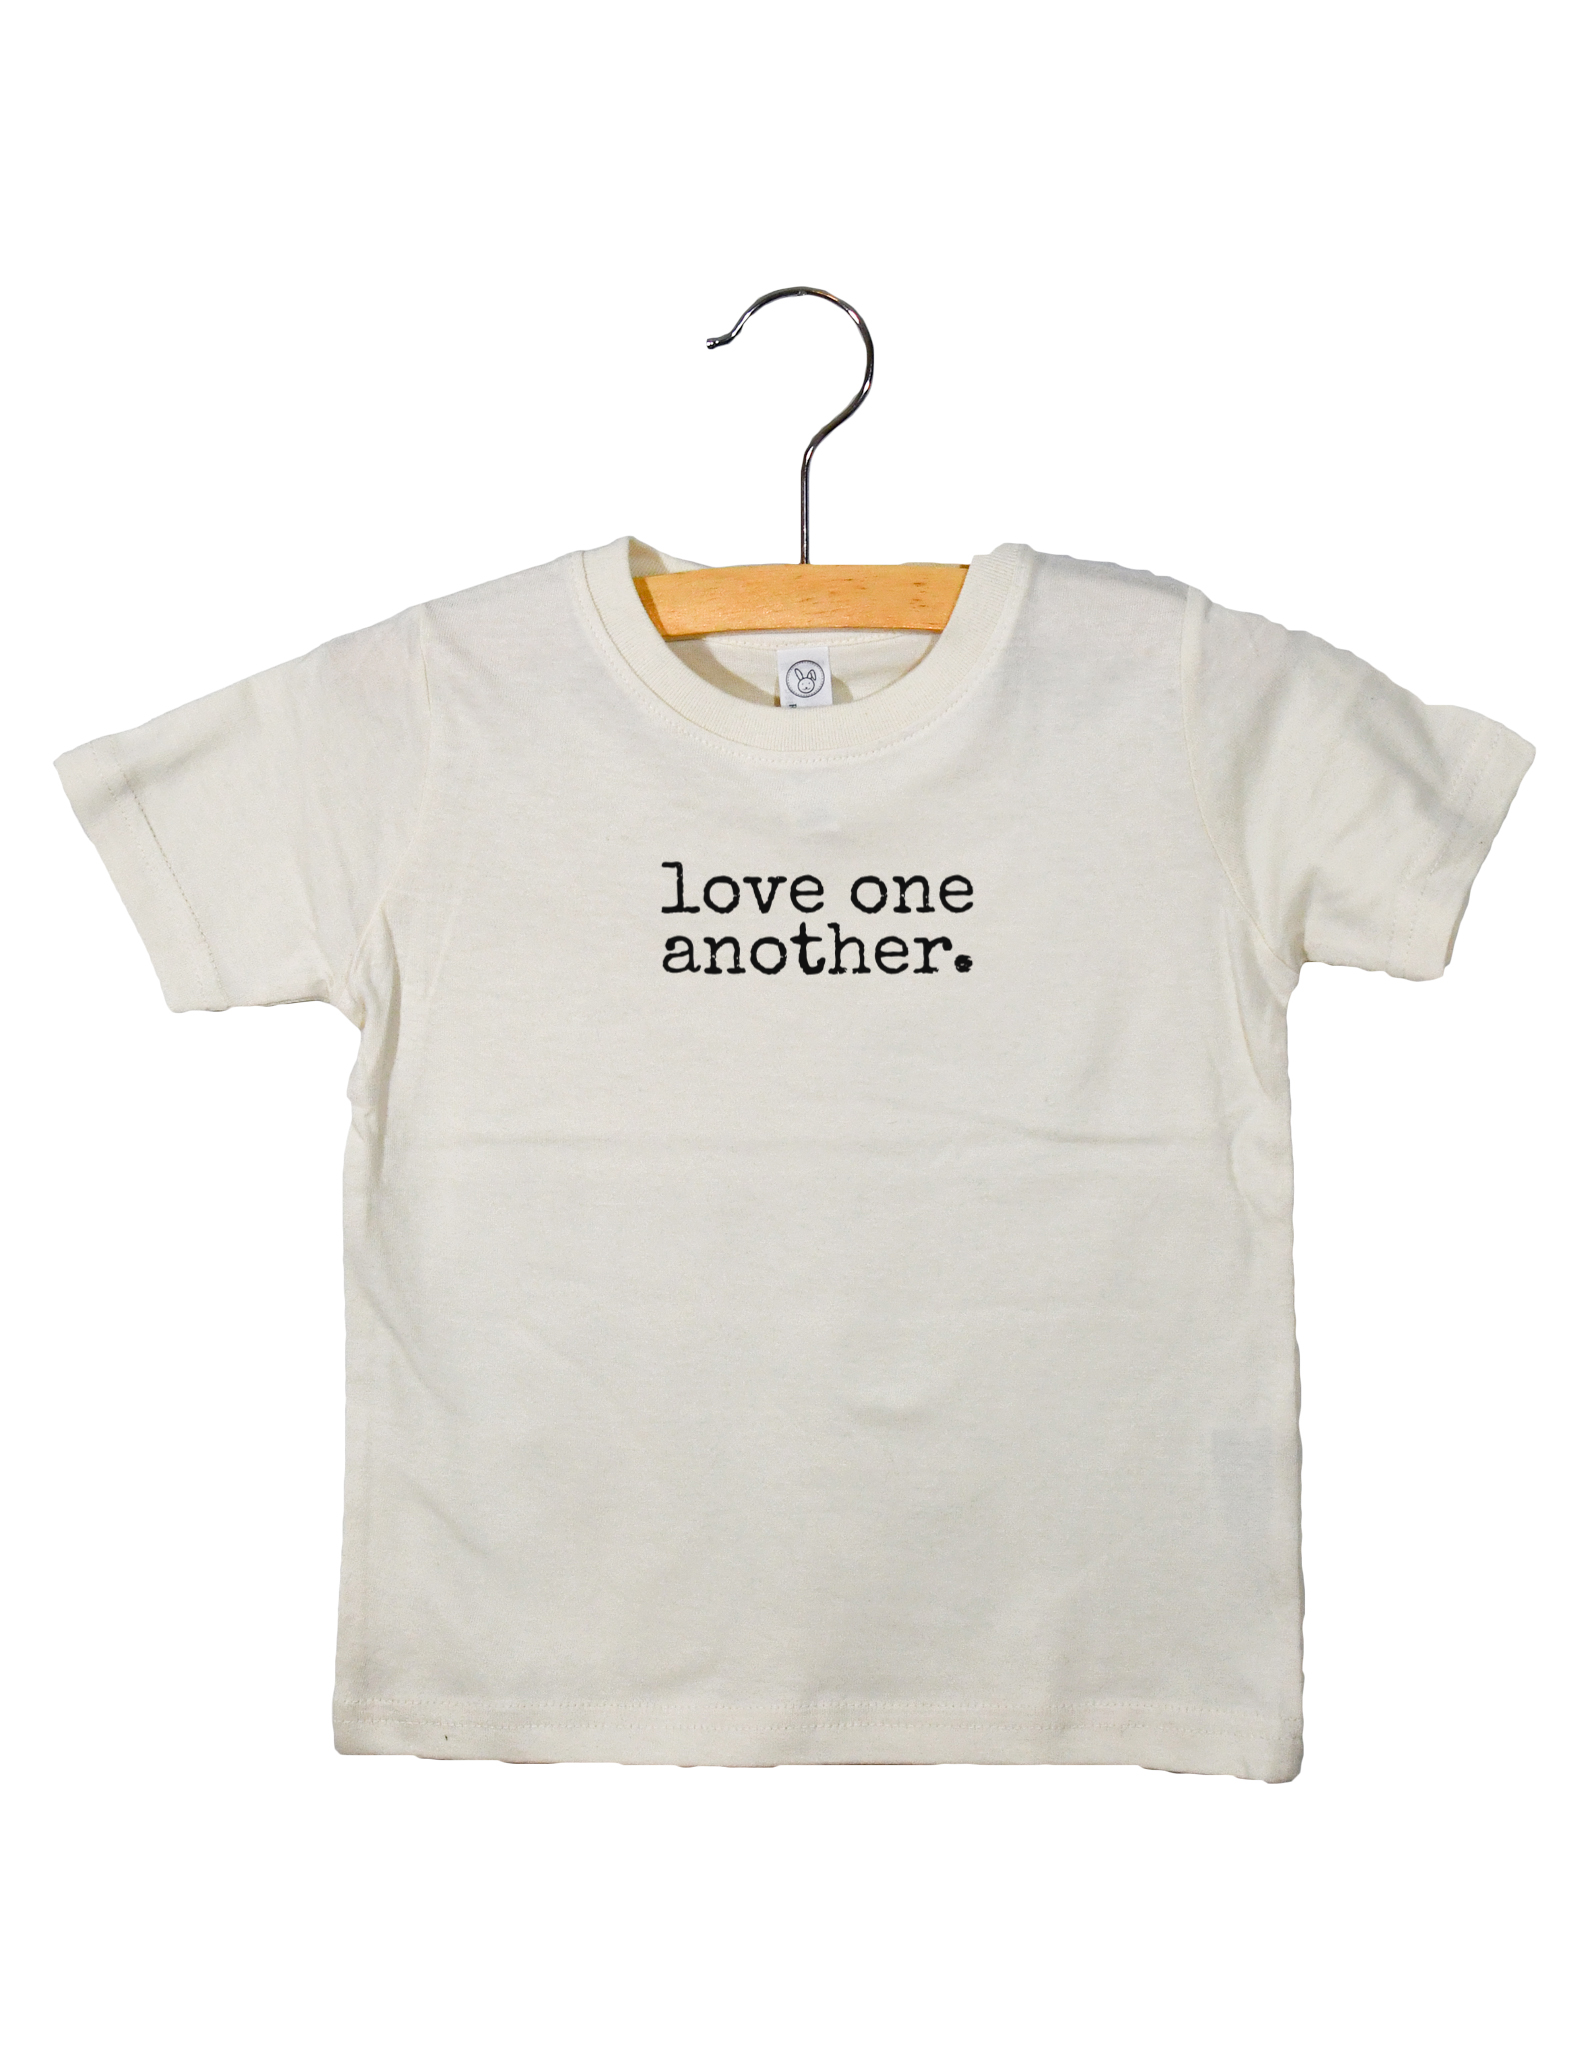 Love One Another - Toddler Tee